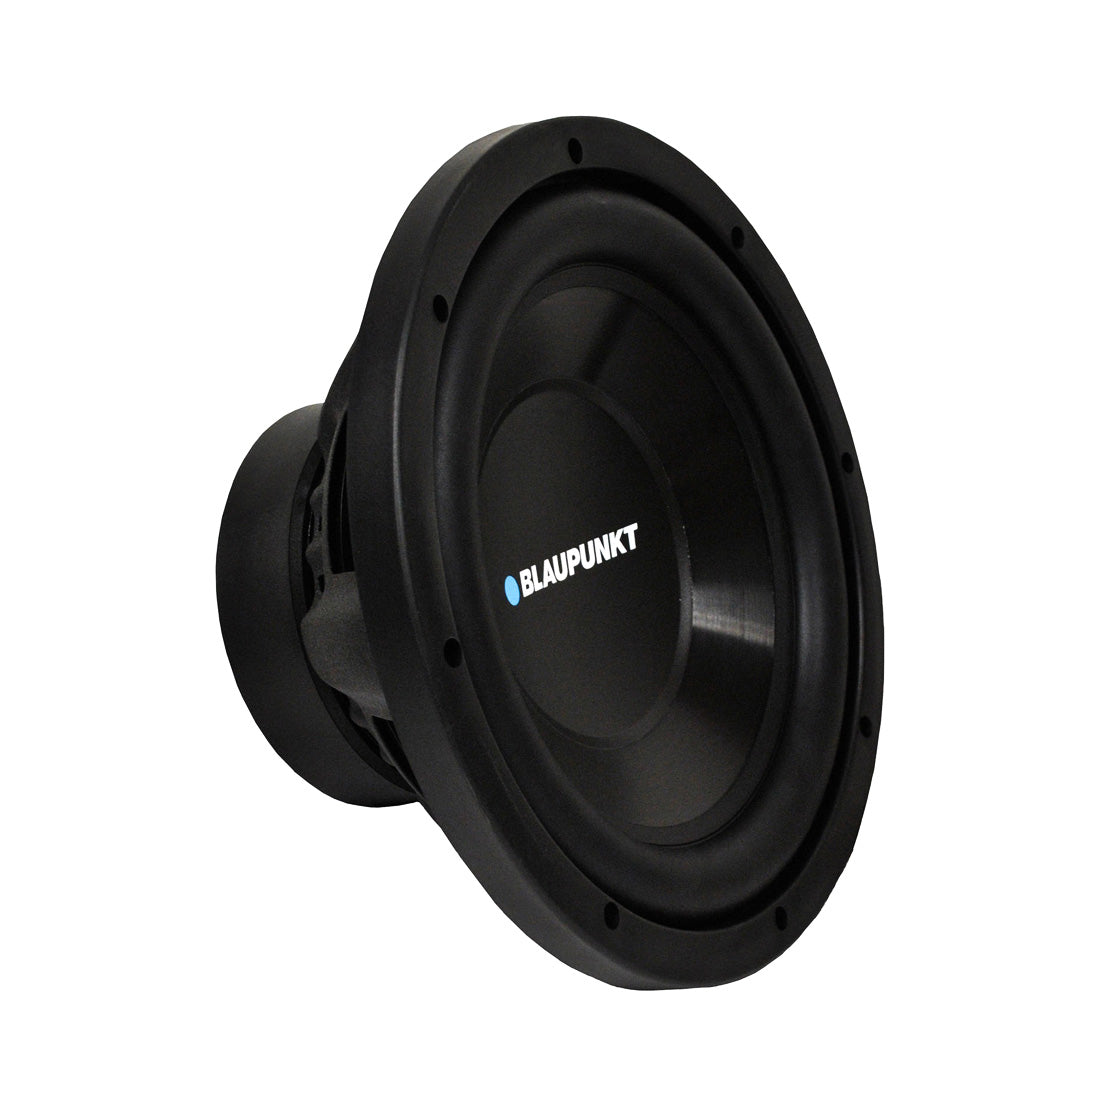 Blaupunkt GBW120 800 W Max 12" Single Voice Coil SVC Stereo Car Audio Subwoofer